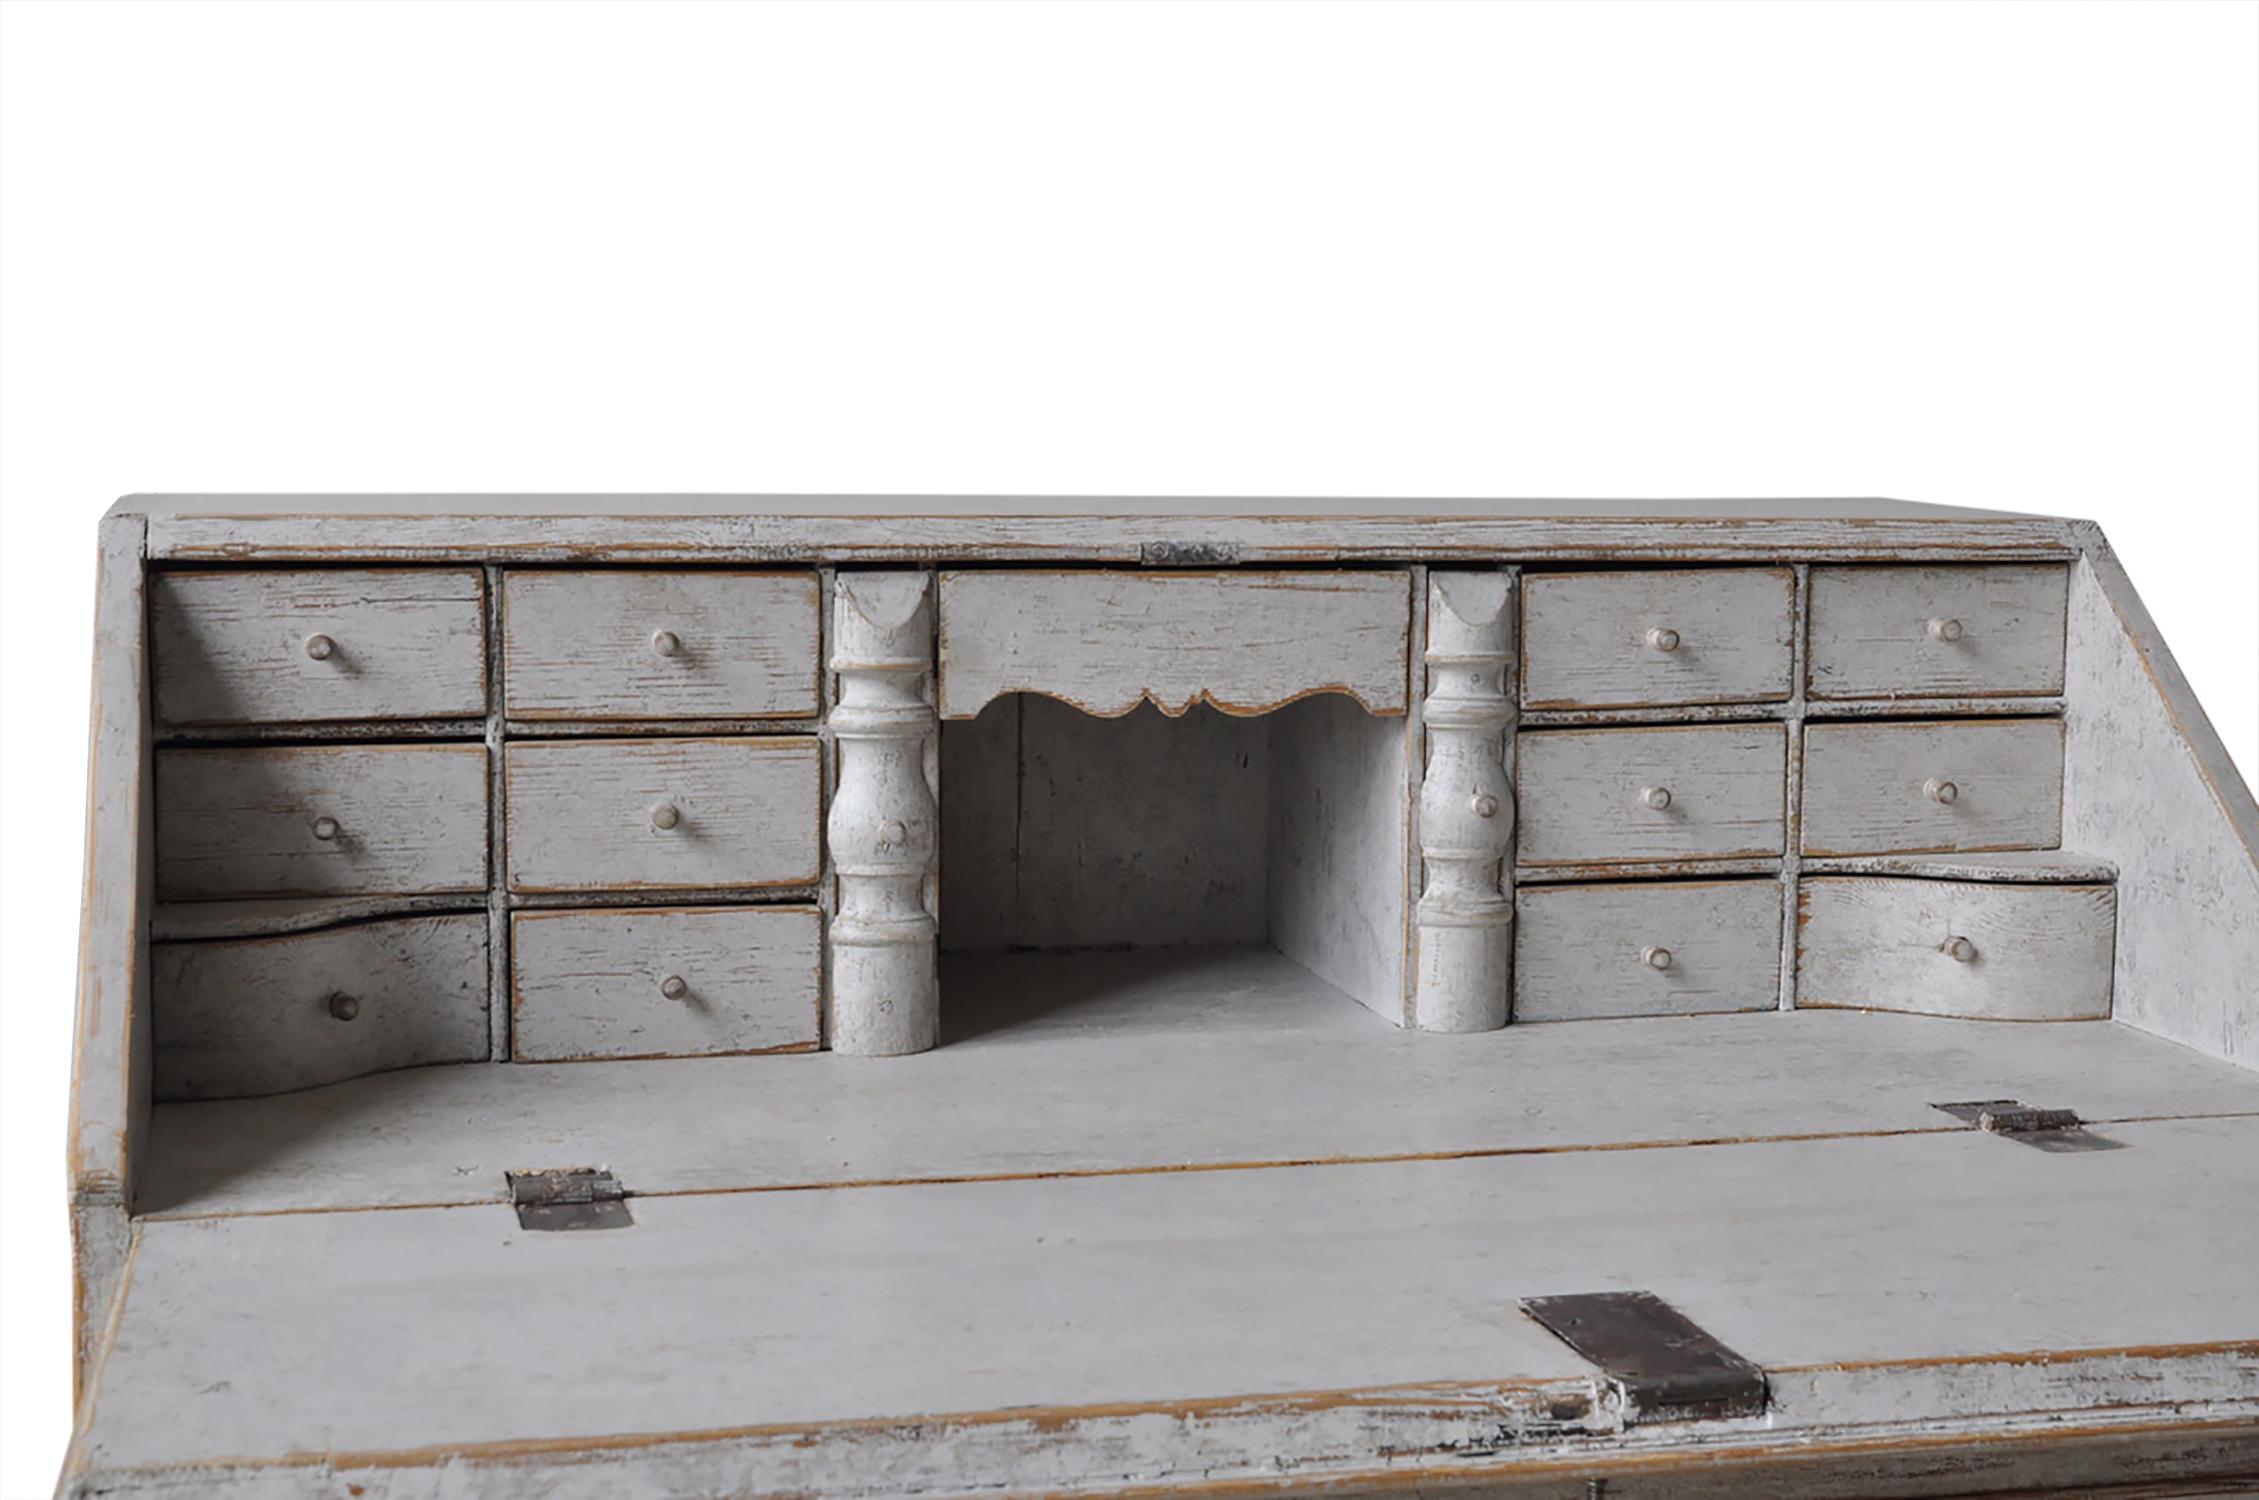 This 18th century Swedish desk features a slant front which opens to eight storage drawers, beneath this are two further short drawers and two long drawers - useful for storage. The drawers each have a decorative edge. This piece is light grey in